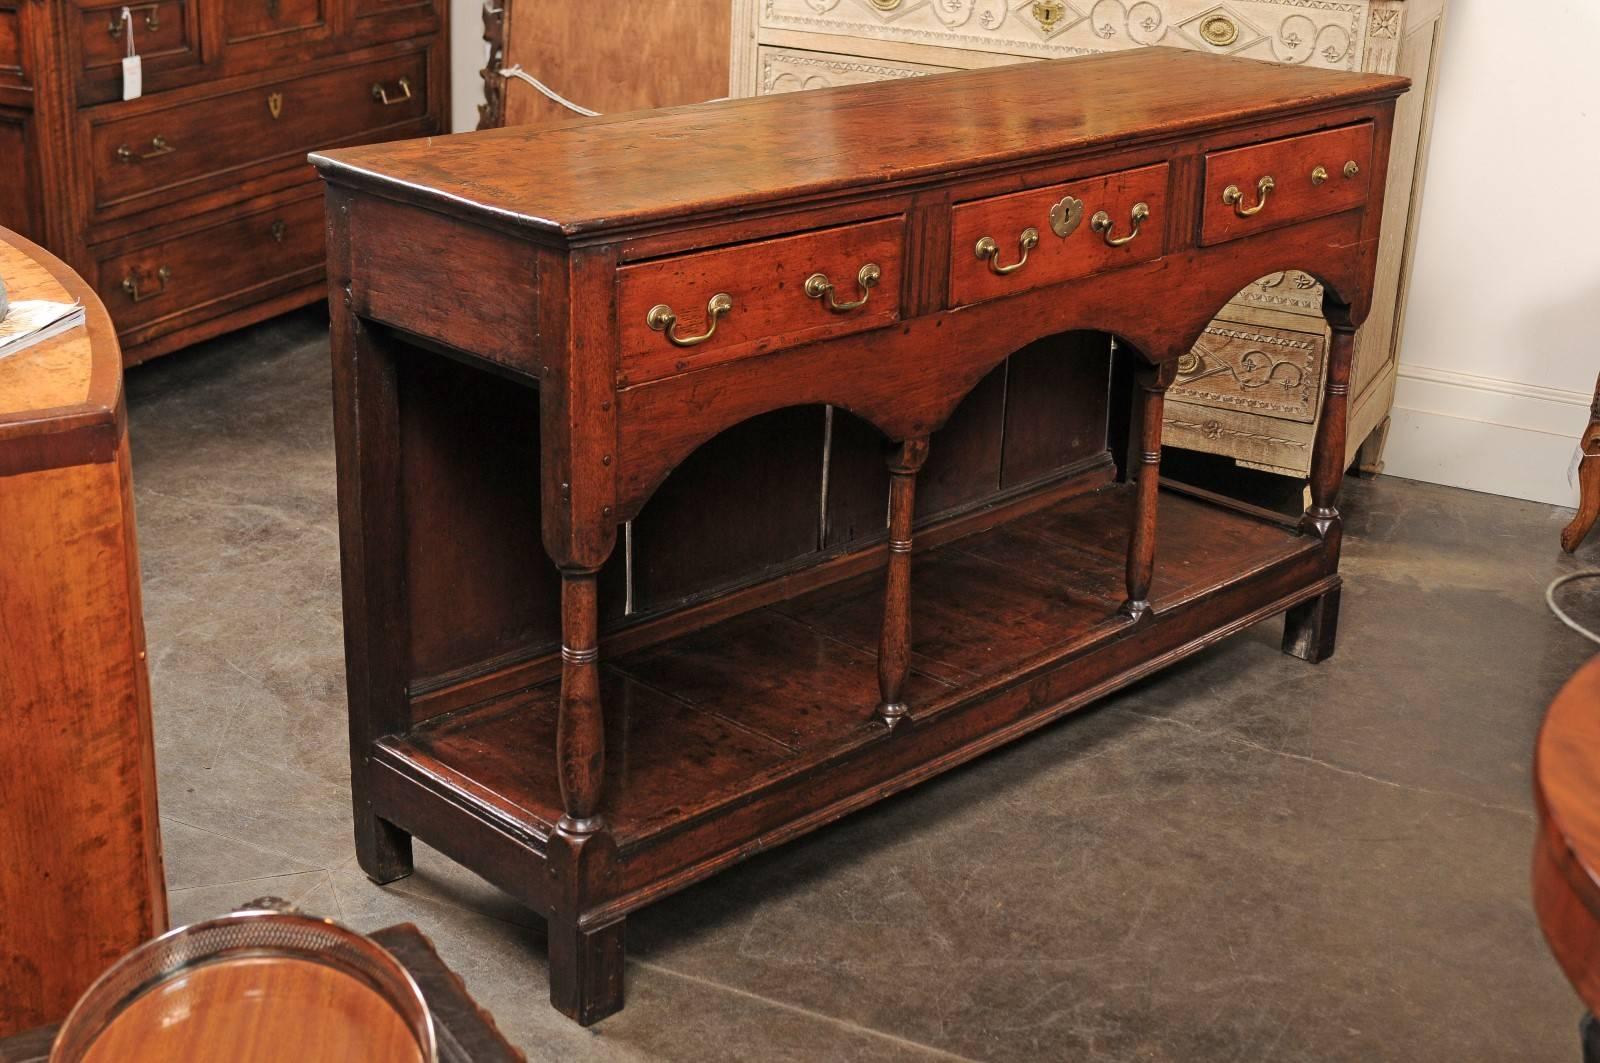 This English George III oak and fruitwood server dresser base from the late 18th century features a rectangular top over three drawers and a lower shelf. Each drawer is adorned with brass hardware, the central one with the addition of an escutcheon.